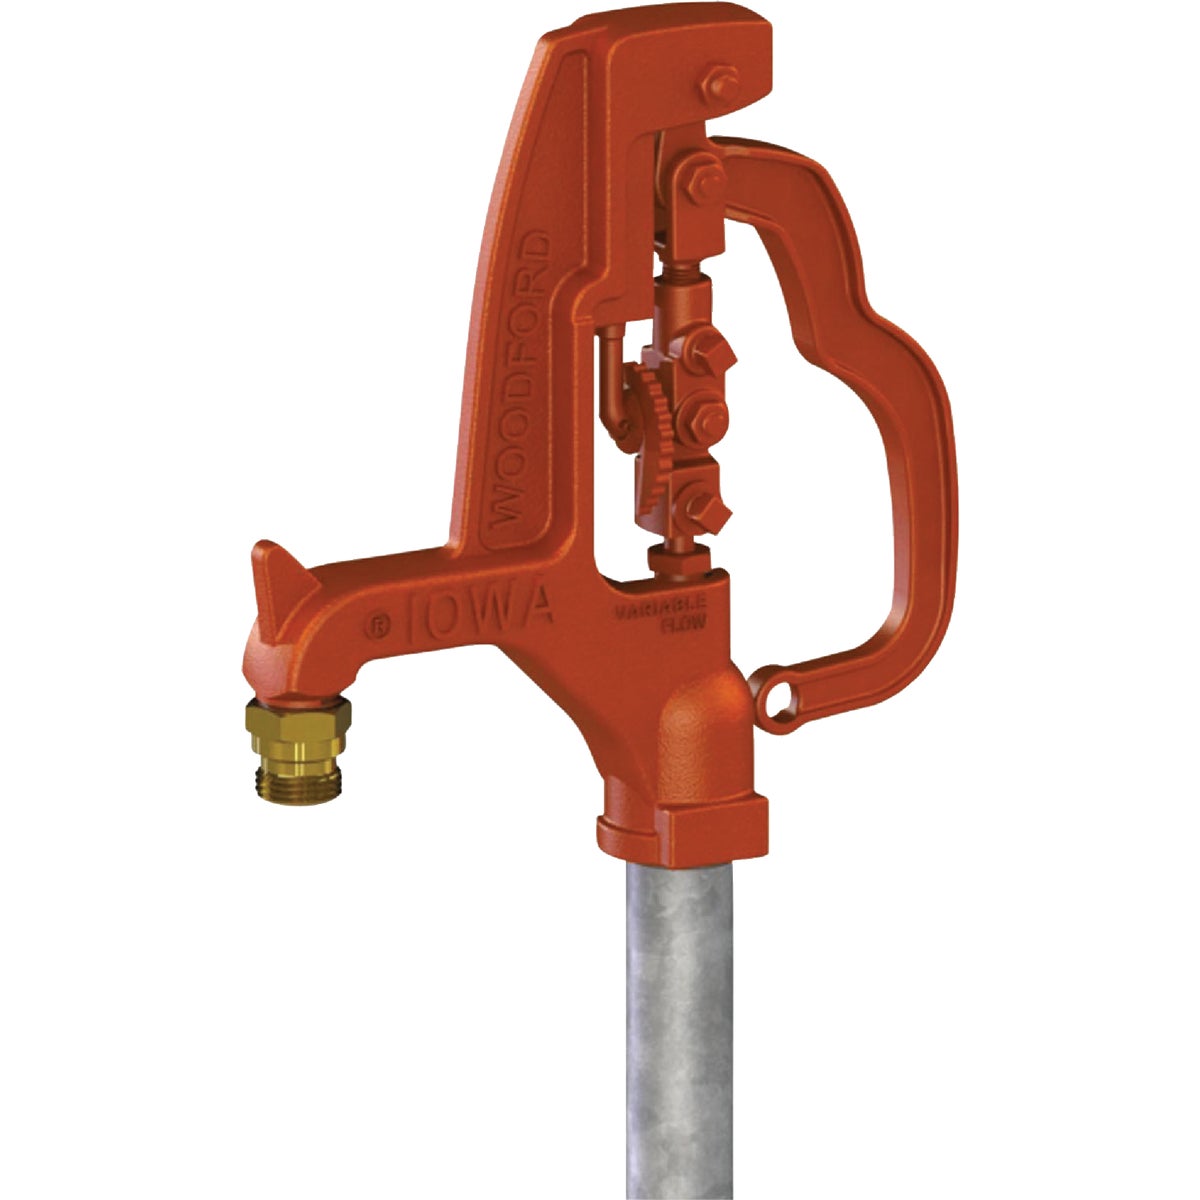 Item 404880, Woodford Y34 freezeless yard hydrant 1 In. x 3/4 In. NPT x MPT 1 In.